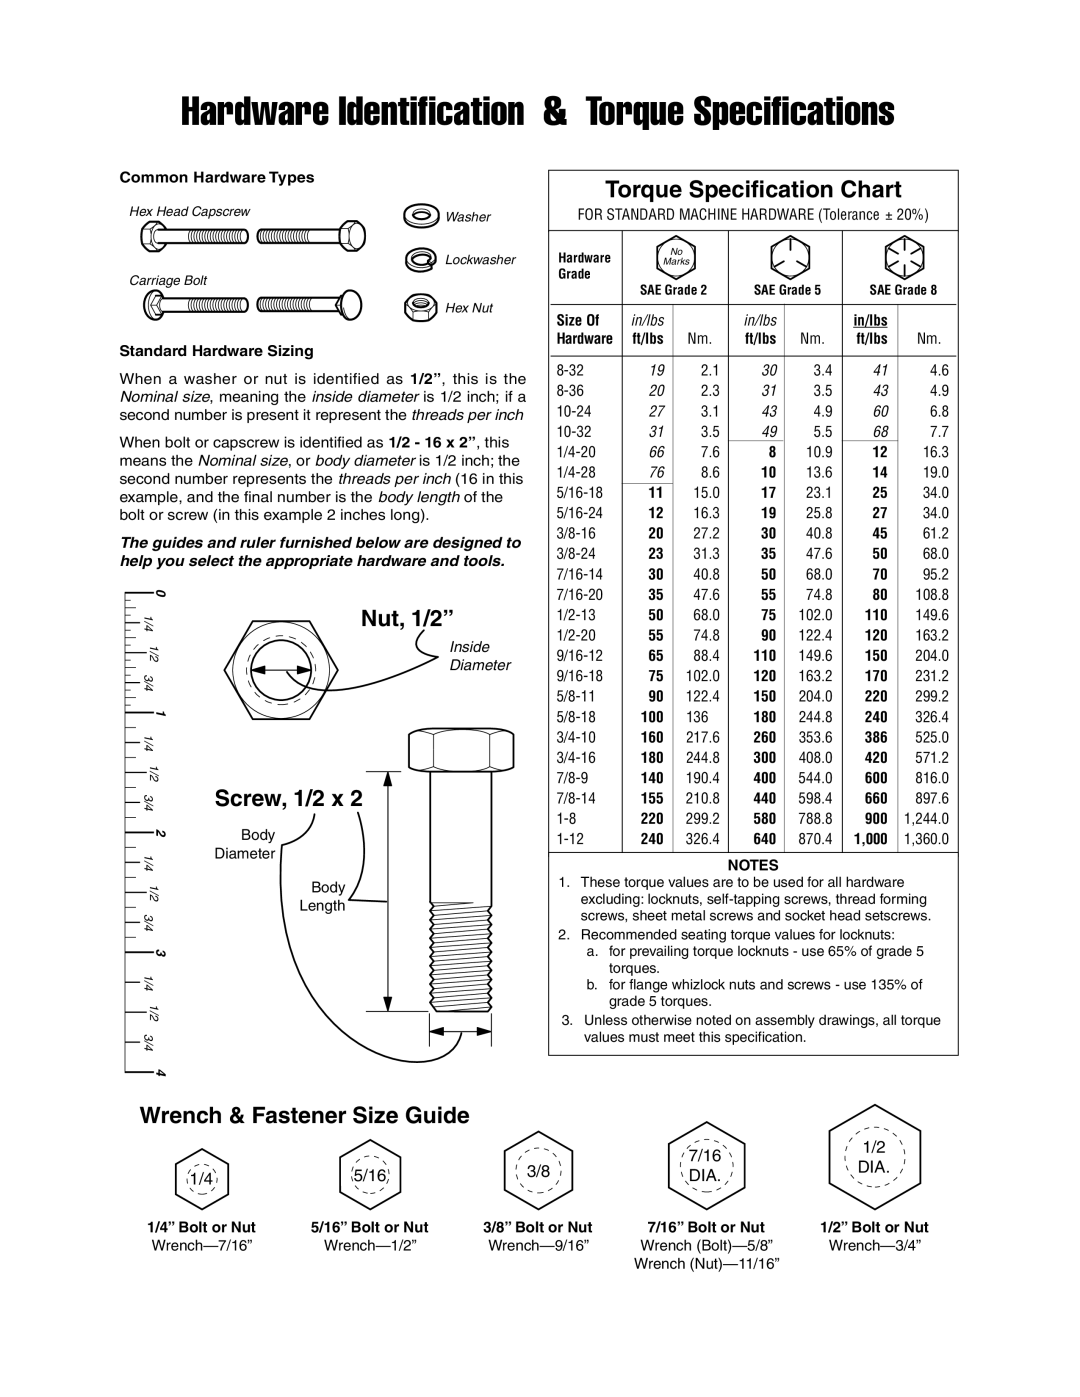 Snapper 4559 Wrench & Fastener Size Guide, Common Hardware Types, Standard Hardware Sizing, Notes, 1/4” Bolt or Nut, 7/16 